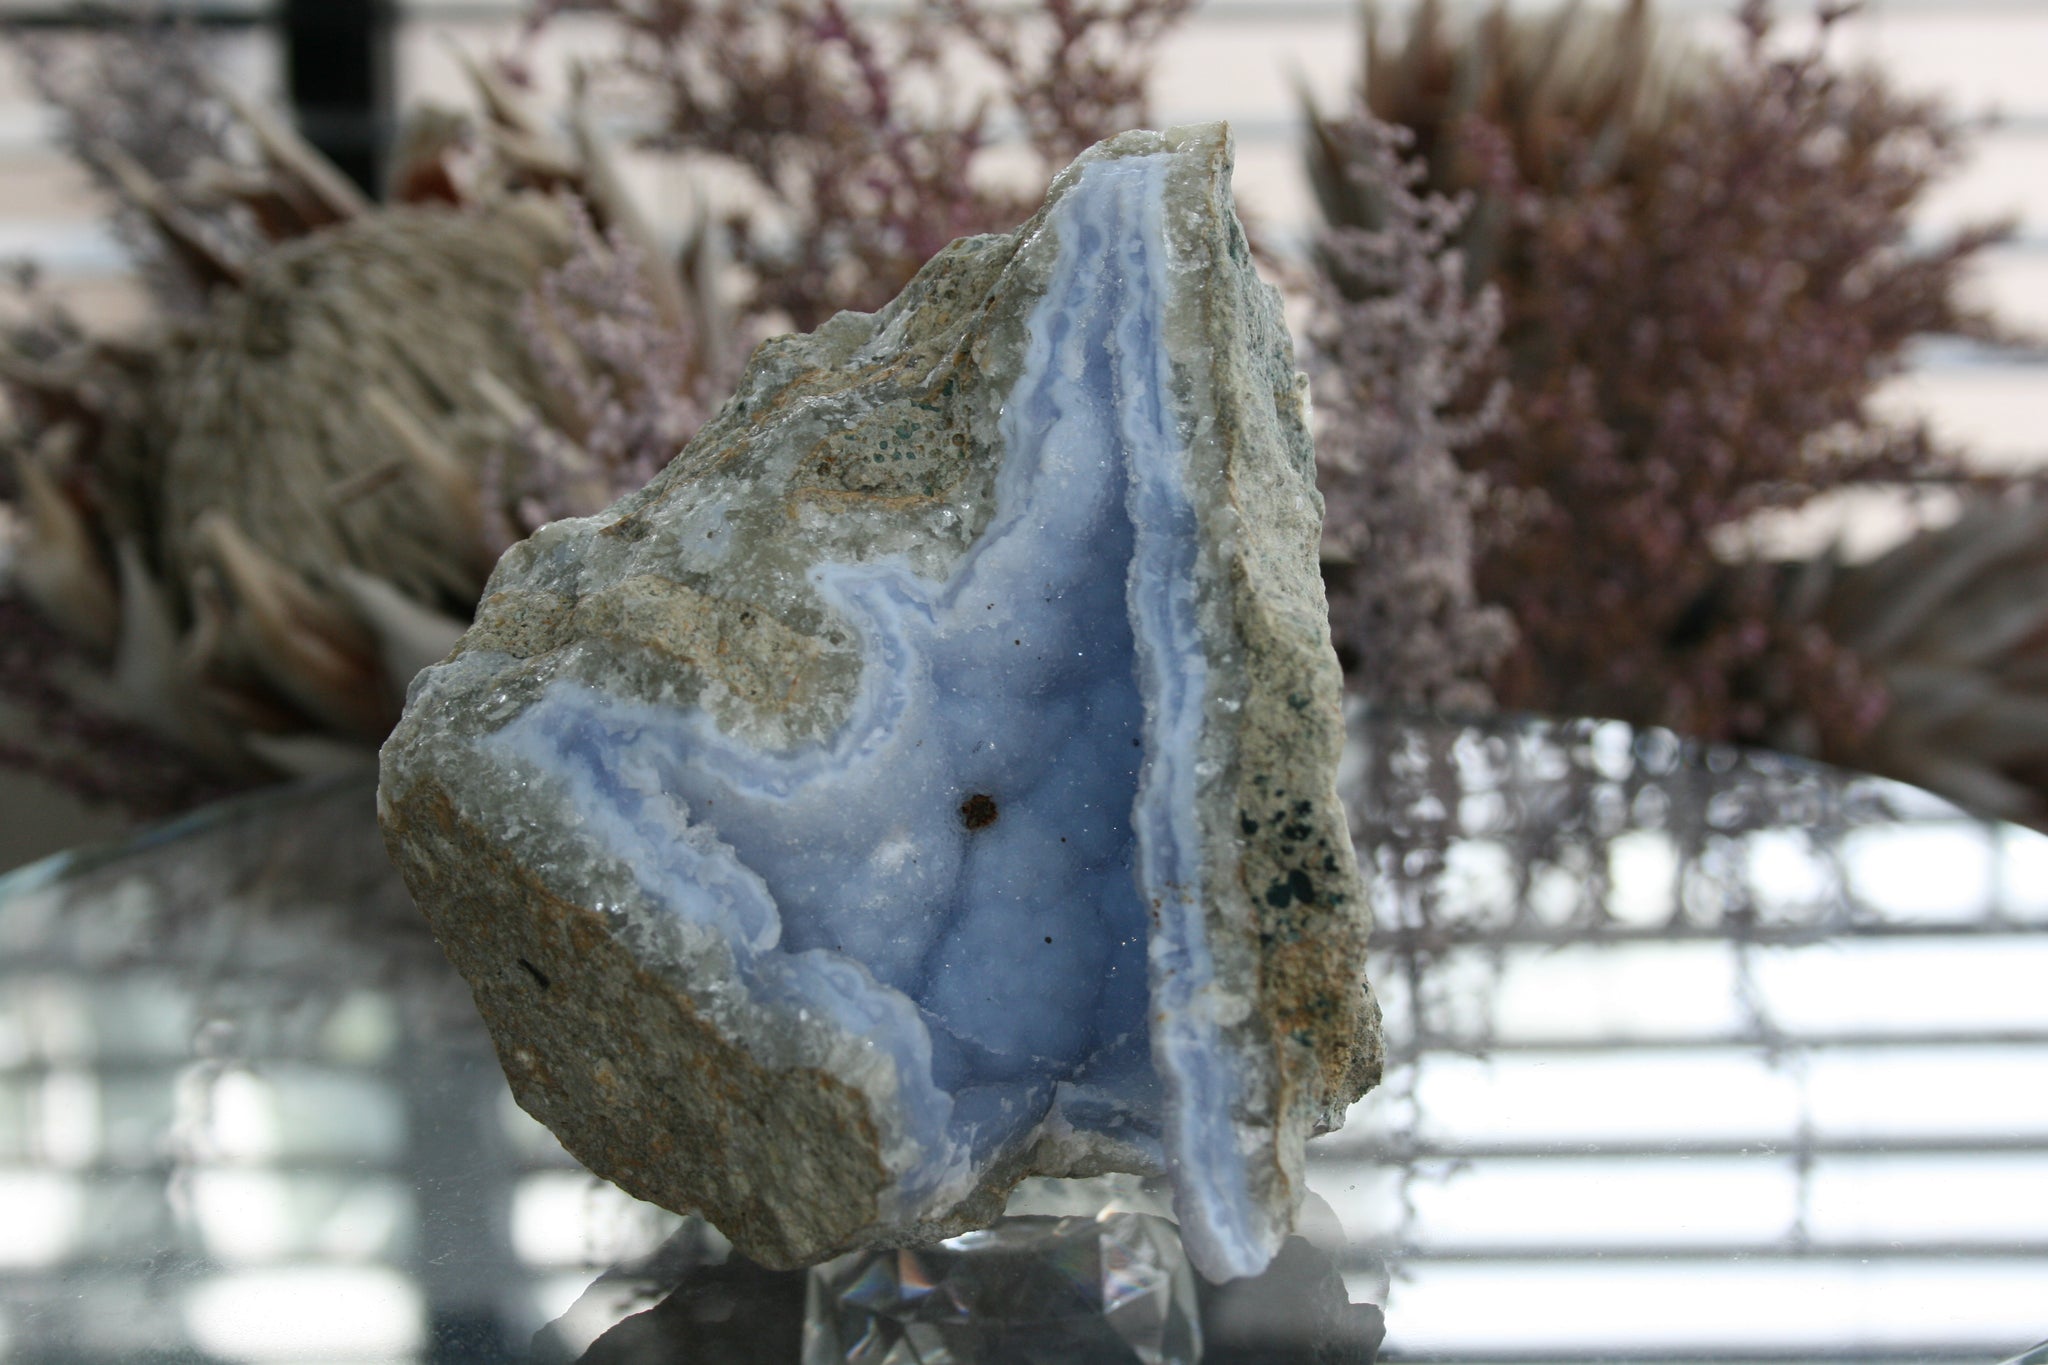 Rare Blue and White Lace Agate Geode Amethyst Crystals and Calcite